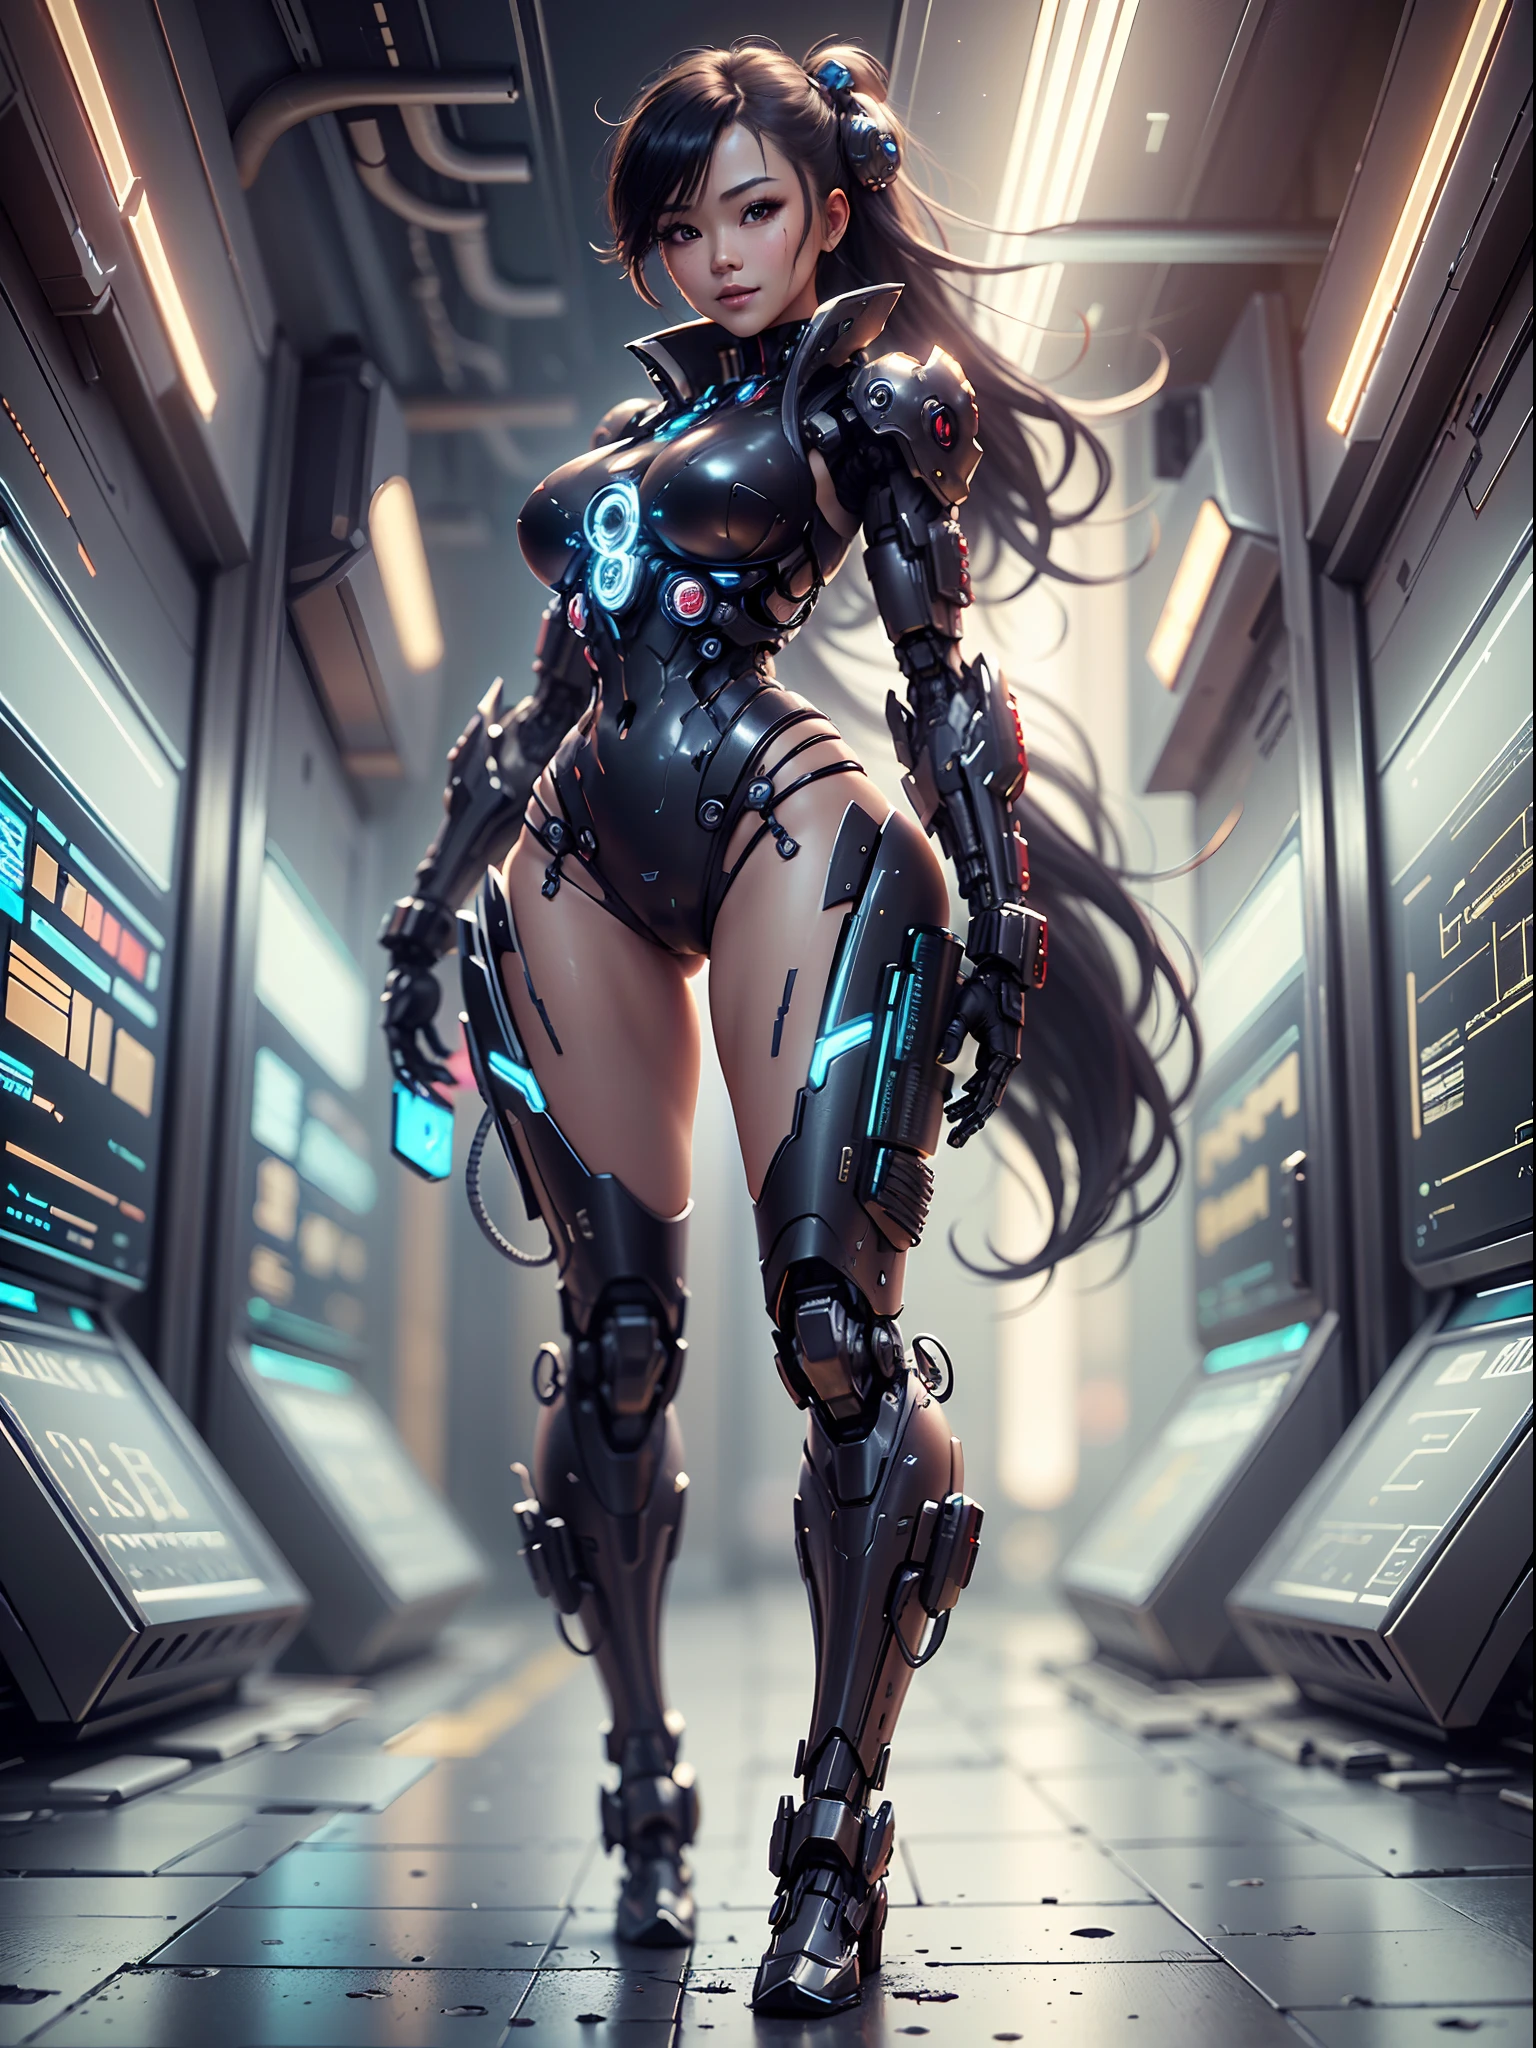 Mecha combined with flesh sexy asian woman, cyberpunk, full body, standing, hairstyle long hair, smile, cute face. Intricate and reflective details. Background is in focus and in hyper detail. Your face is very cute and sexy. 4k unreal engine 5 monochromatic